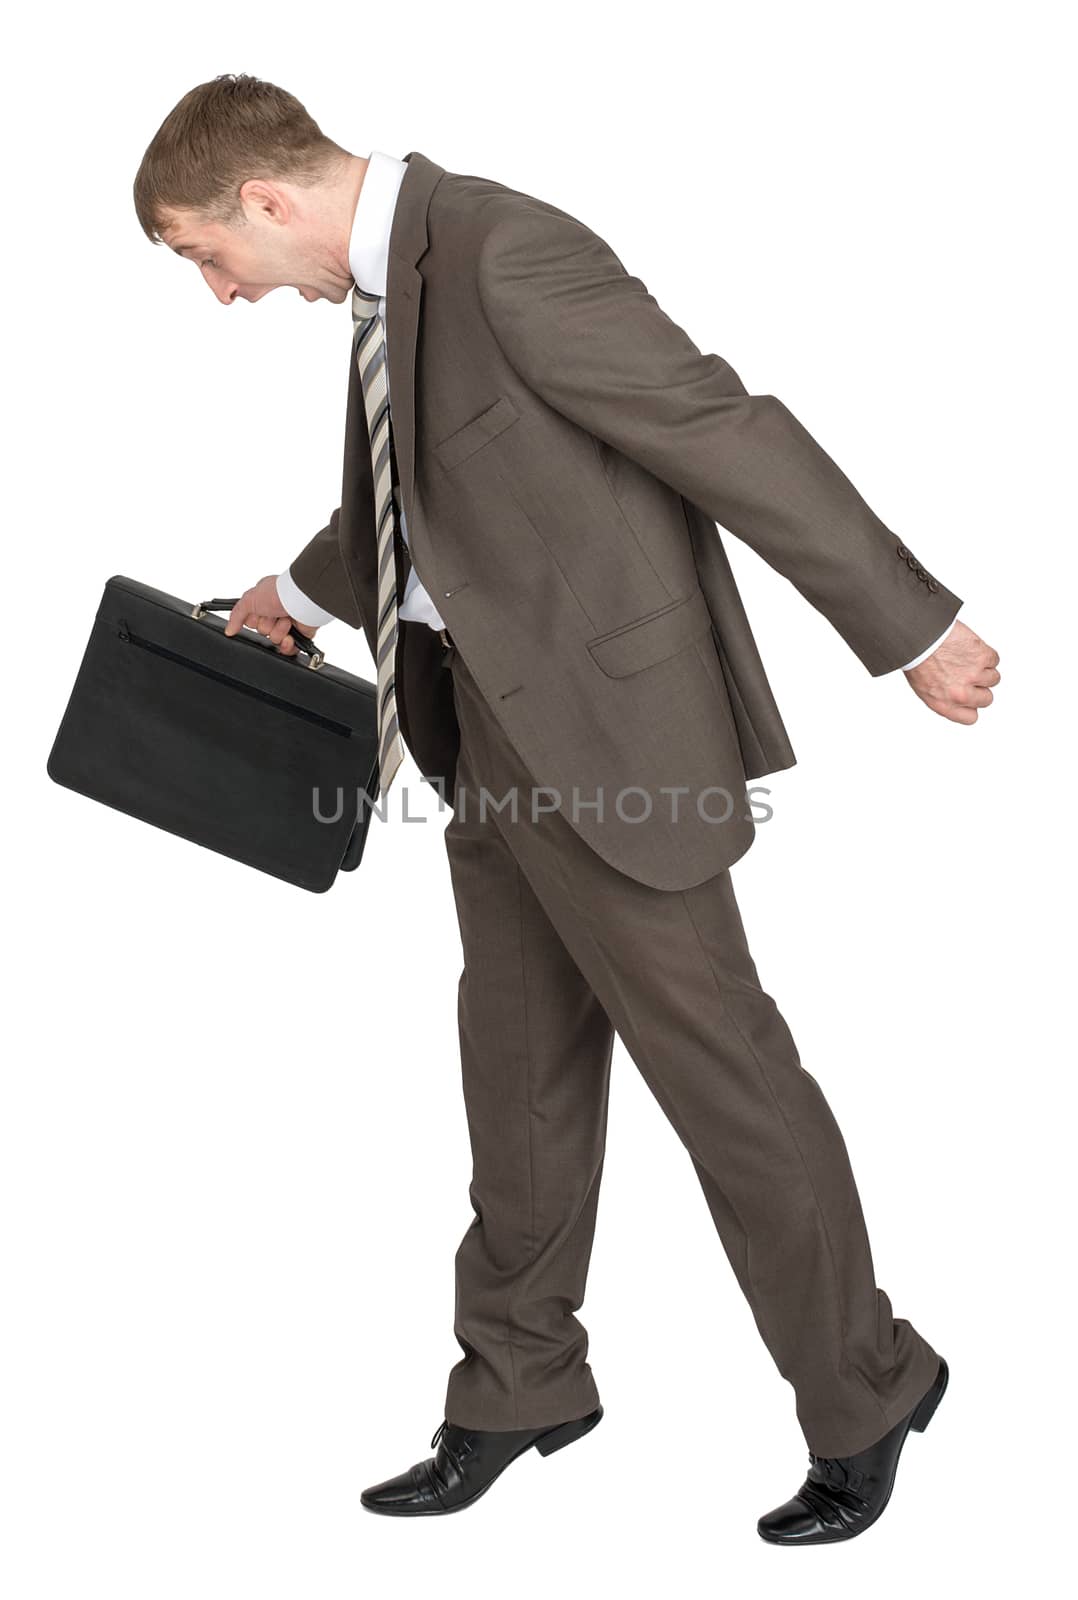 Scared businessman with briefcase looking down isolated on white background, side view